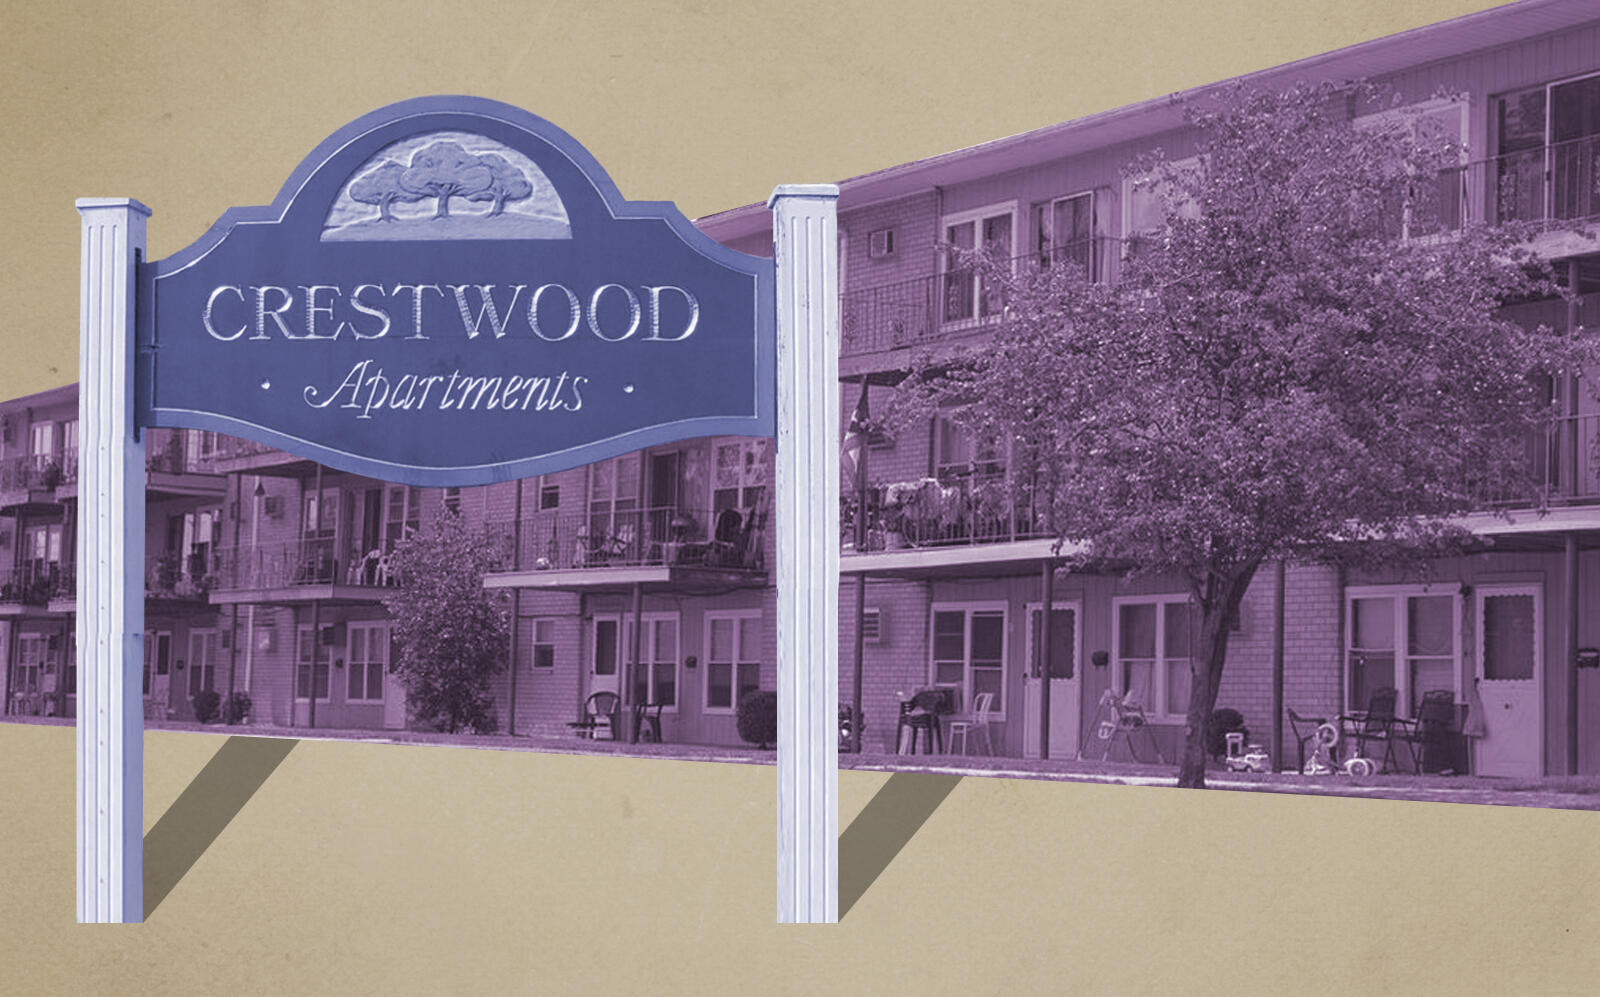 Crestwood Apartments in Middletown, New York. (Realtor)